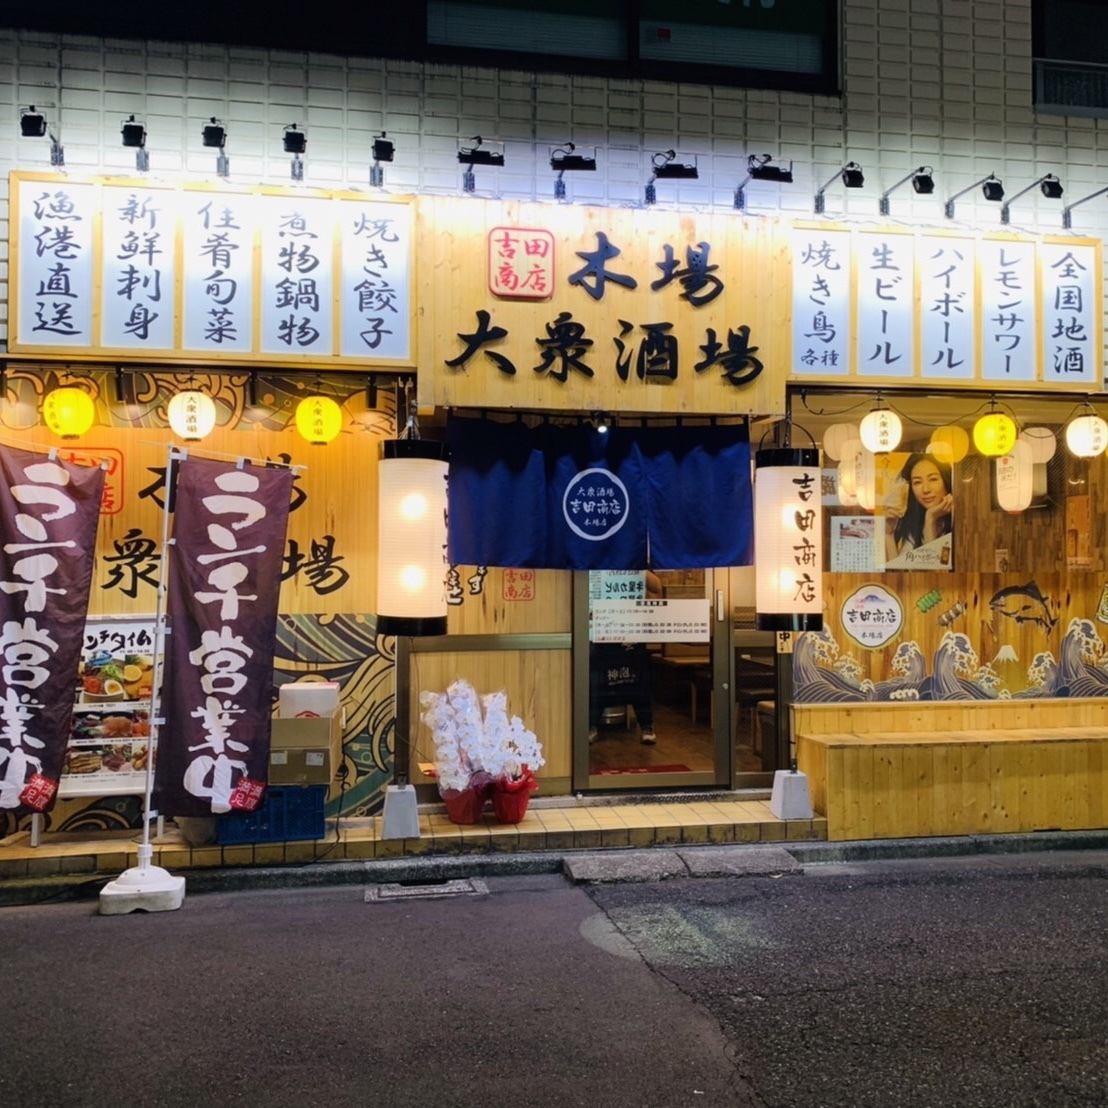 A public bar about a 1-minute walk from Exit 3 of Kiba Station